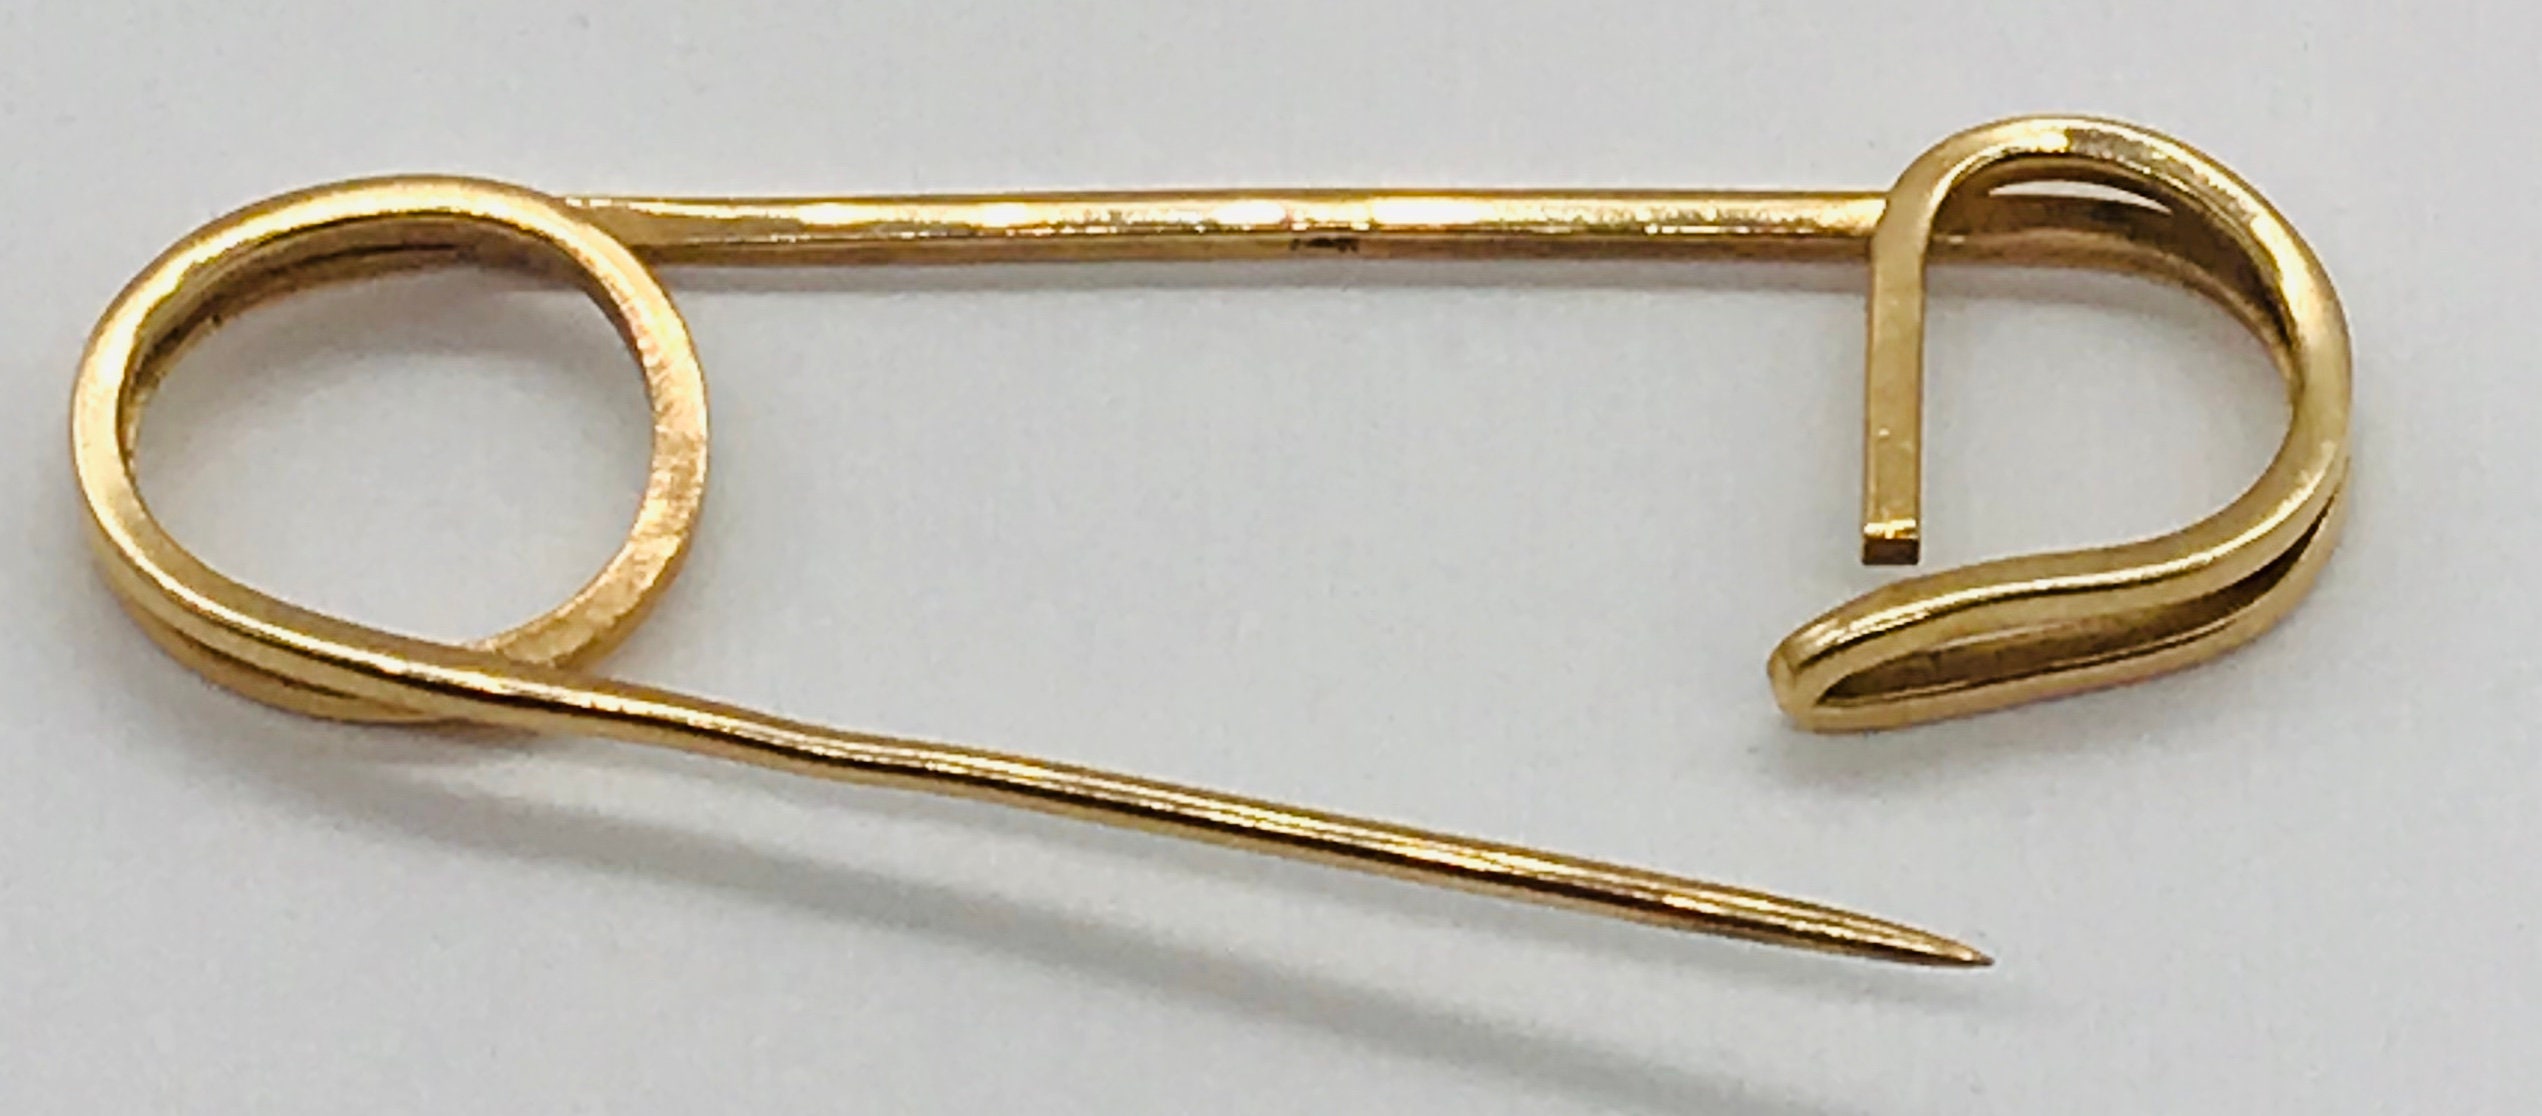 14K Vintage Safety Pin Simple Diaper Pin/Brooch Yellow Gold [CFXR